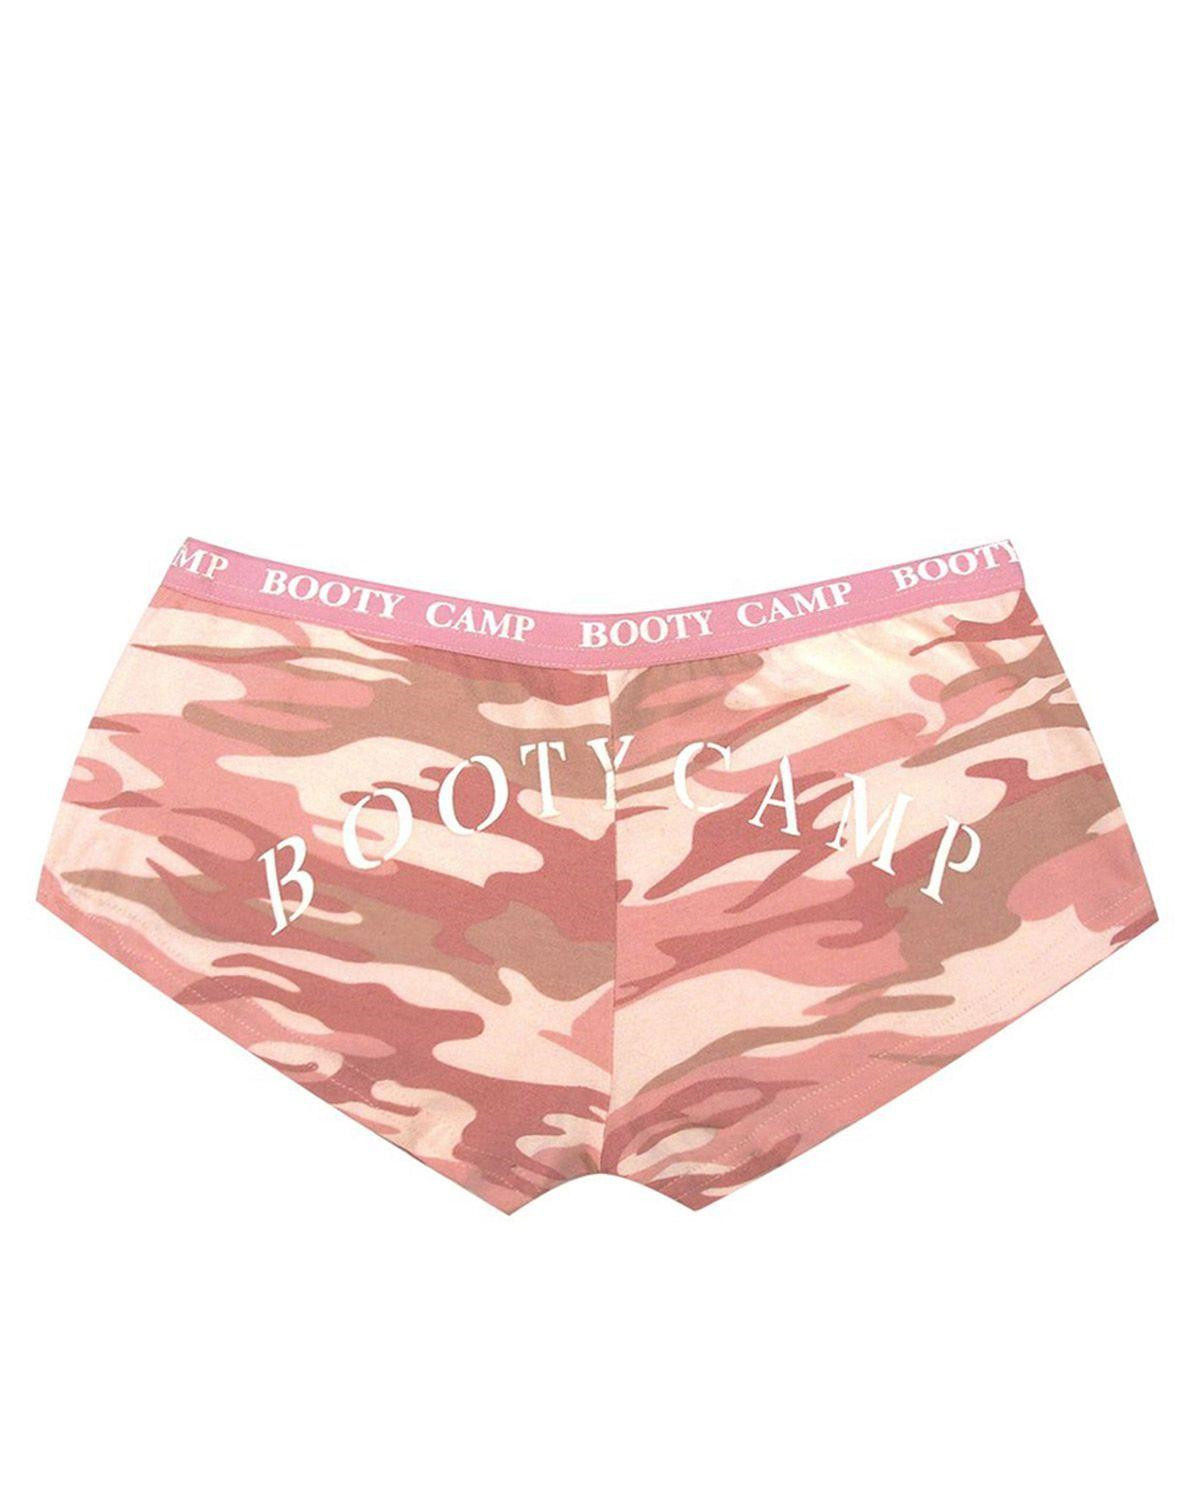 Rothco Trusser - 'Booty Camp' (Pink Camo, L)